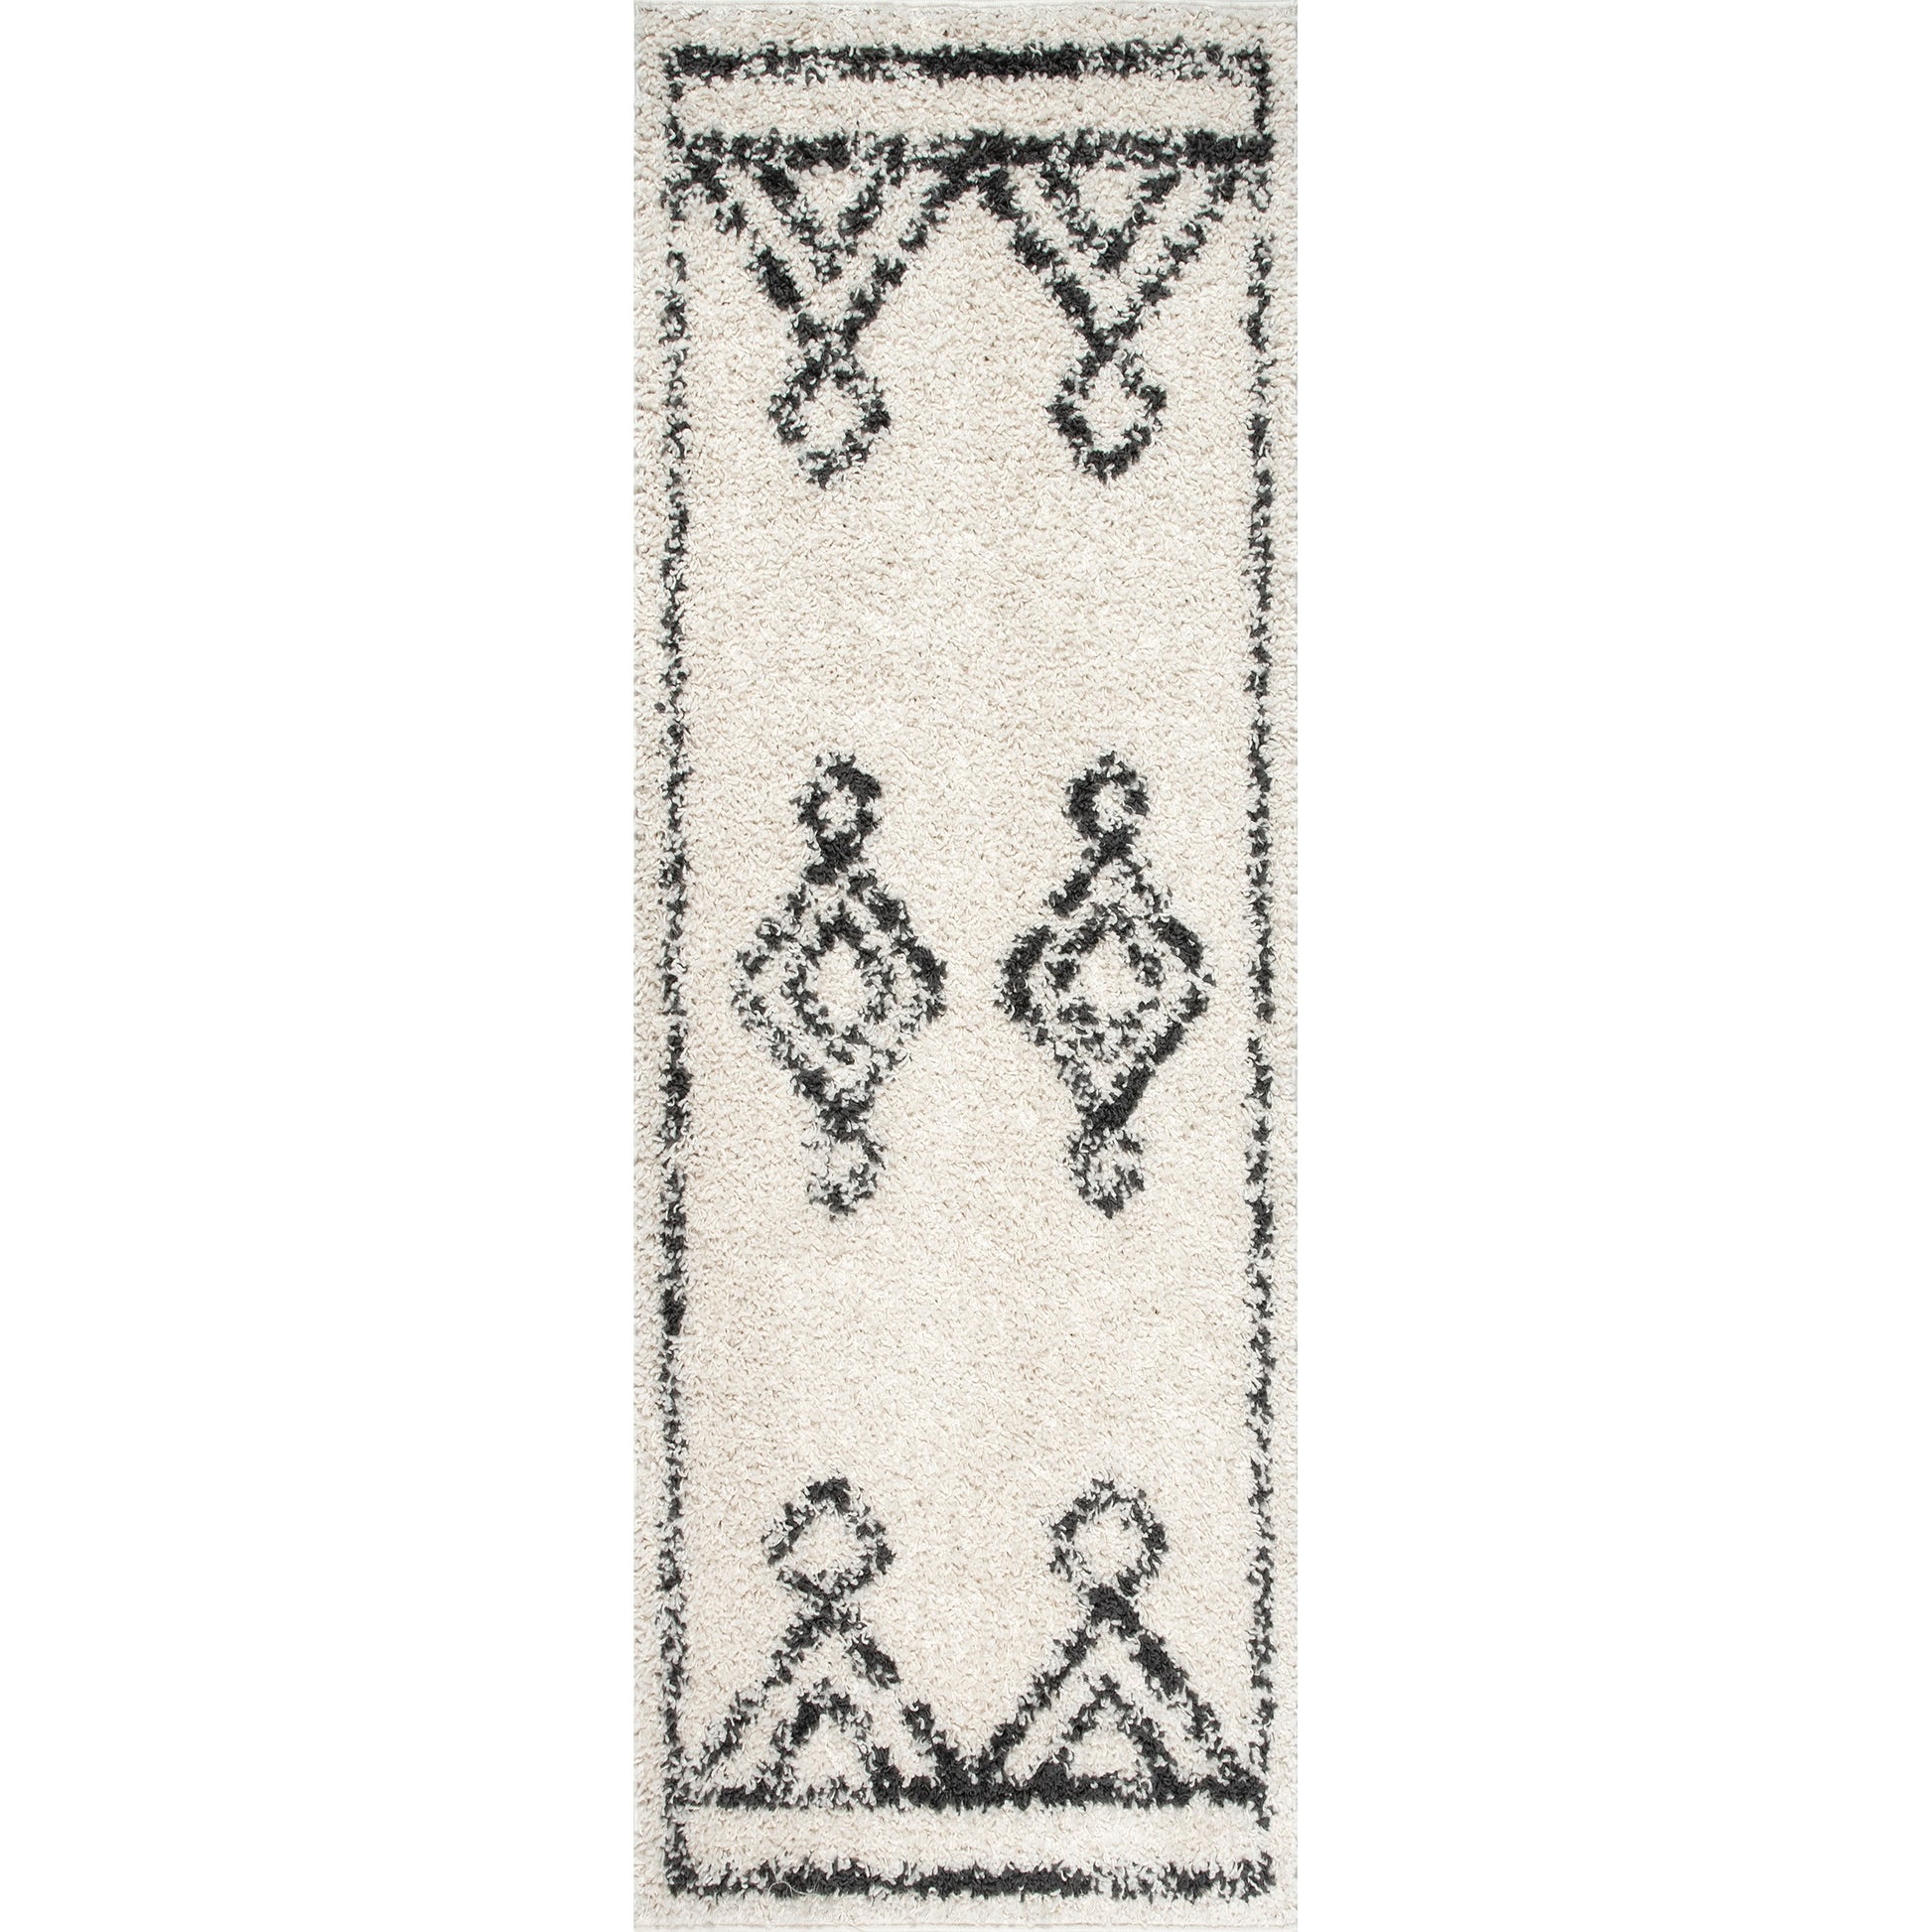 Nuloom Mira Moroccan Plush Nmi1853A Off White Area Rug